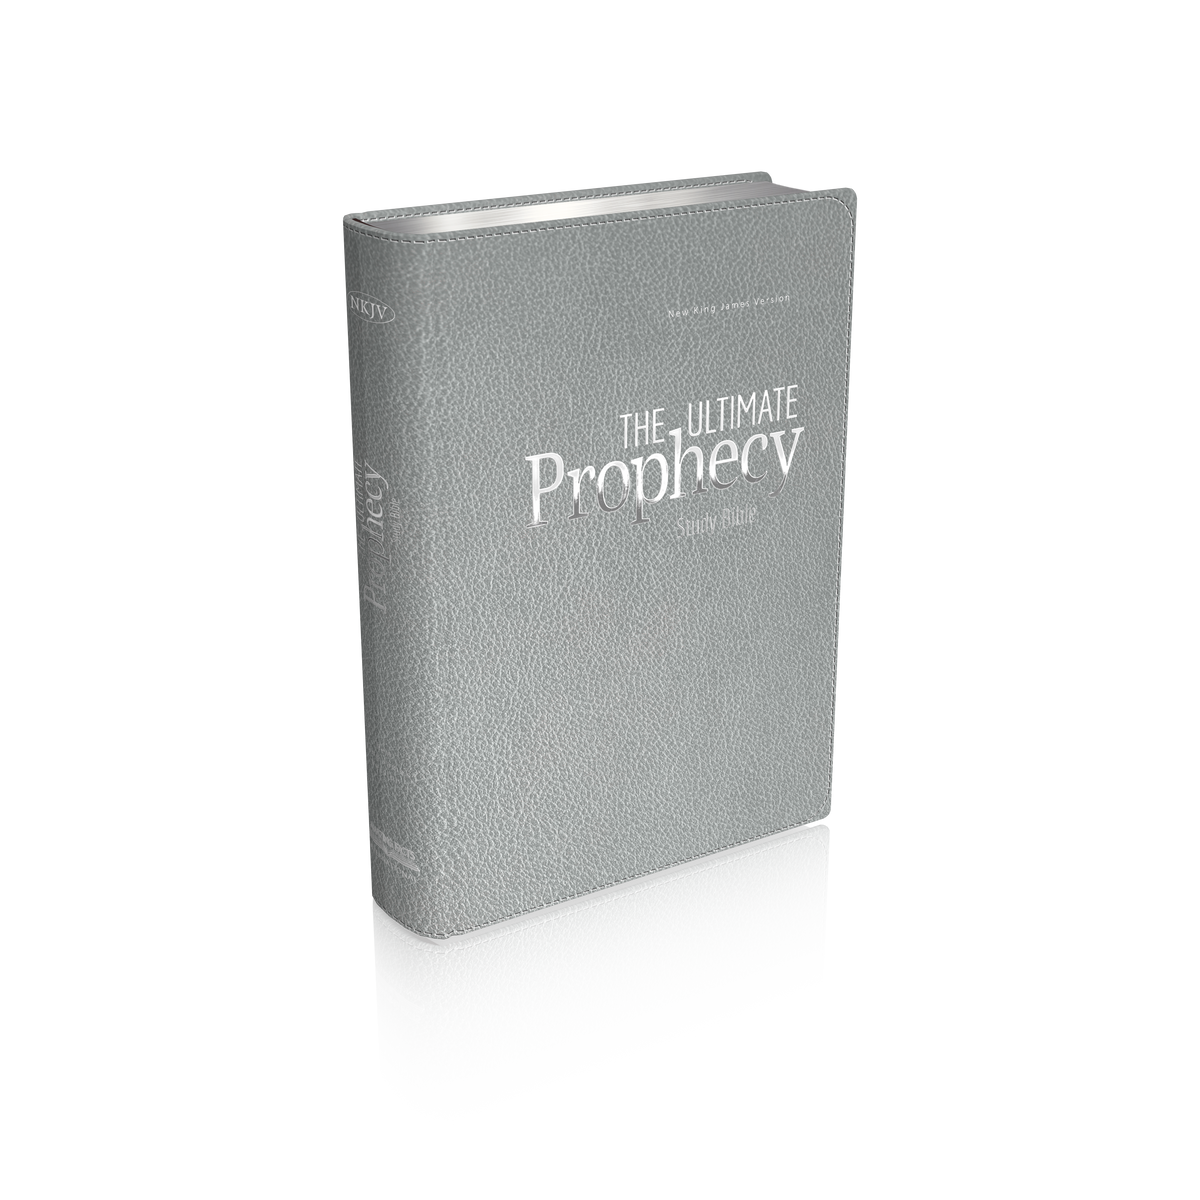 Pre-Order Now! The Ultimate Prophecy Study Bible - Gray Leather by Amazing Facts